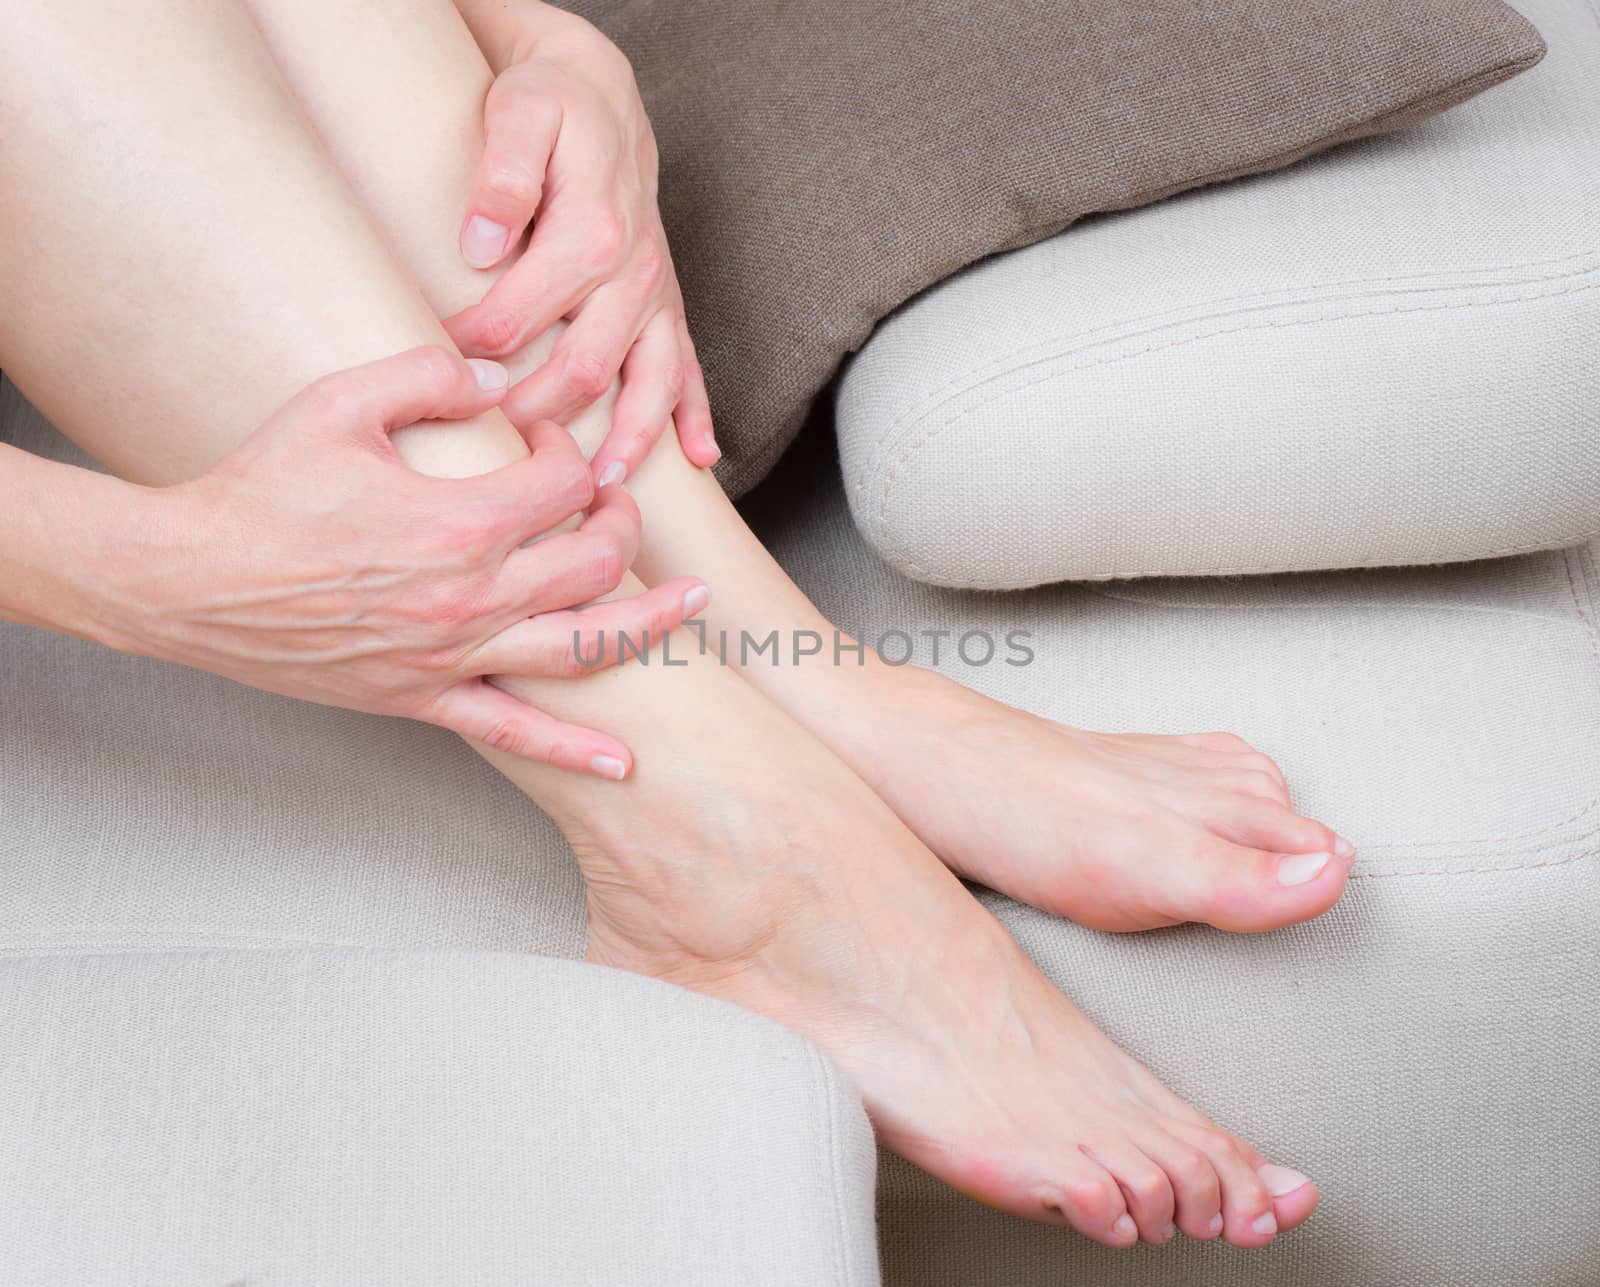 Close up view of tired woman legs on the sofa